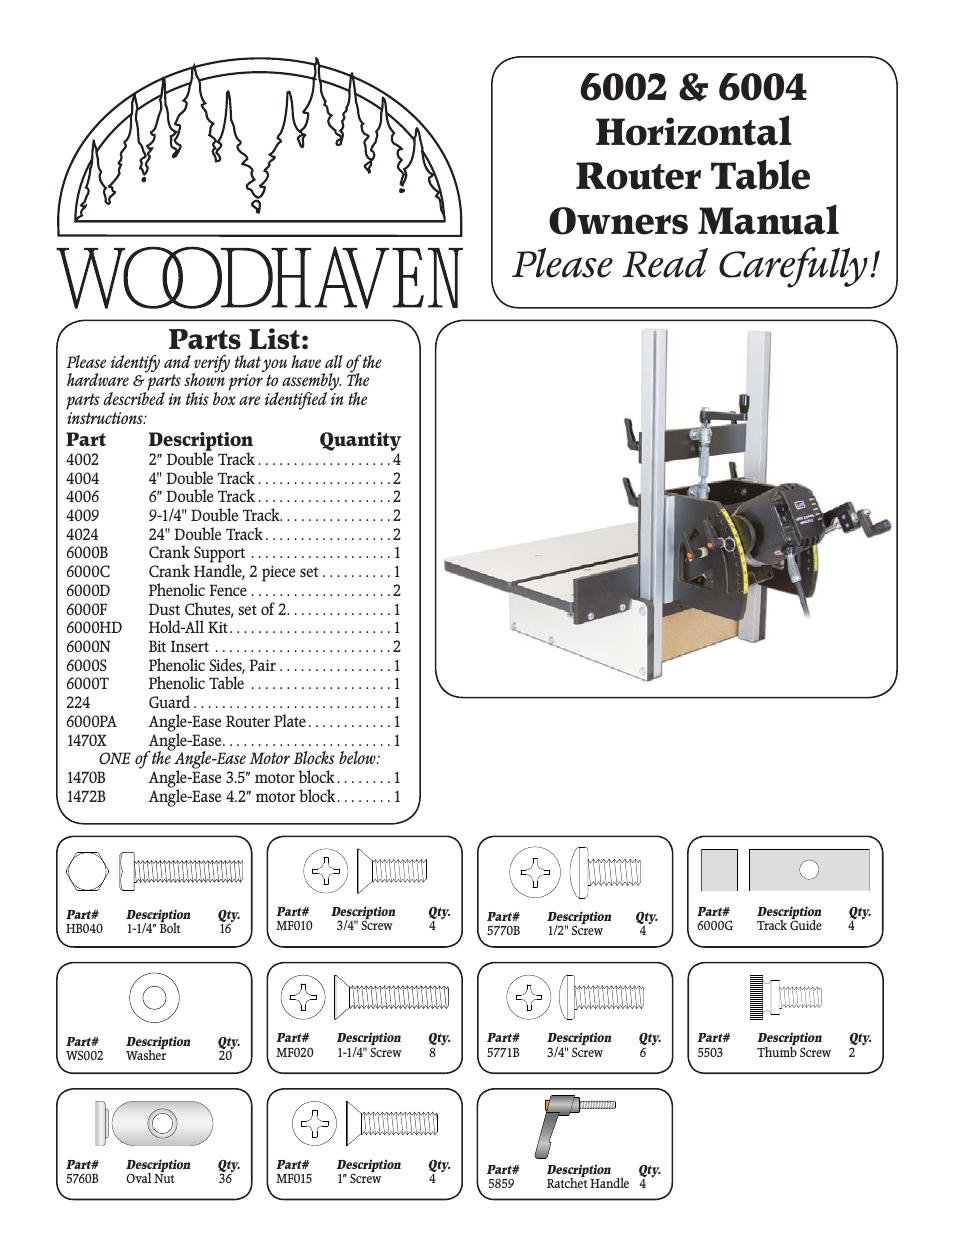 6002-6004: Horizontal Router Table with Angle-Ease